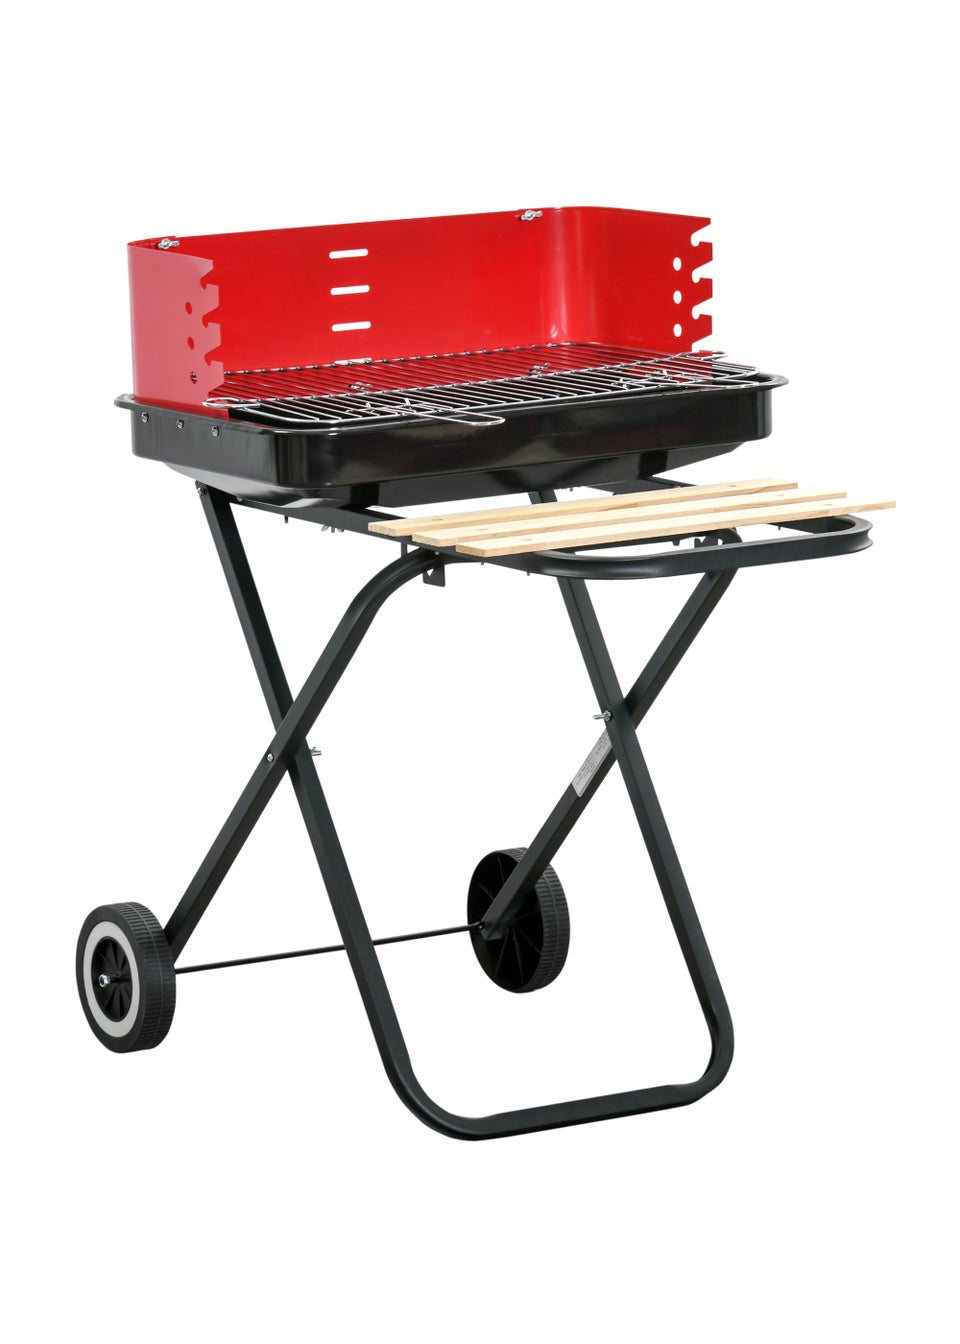 Outsunny Foldable Charcoal Barbecue Grill with Wheels (57cm x 64cm x 83cm)